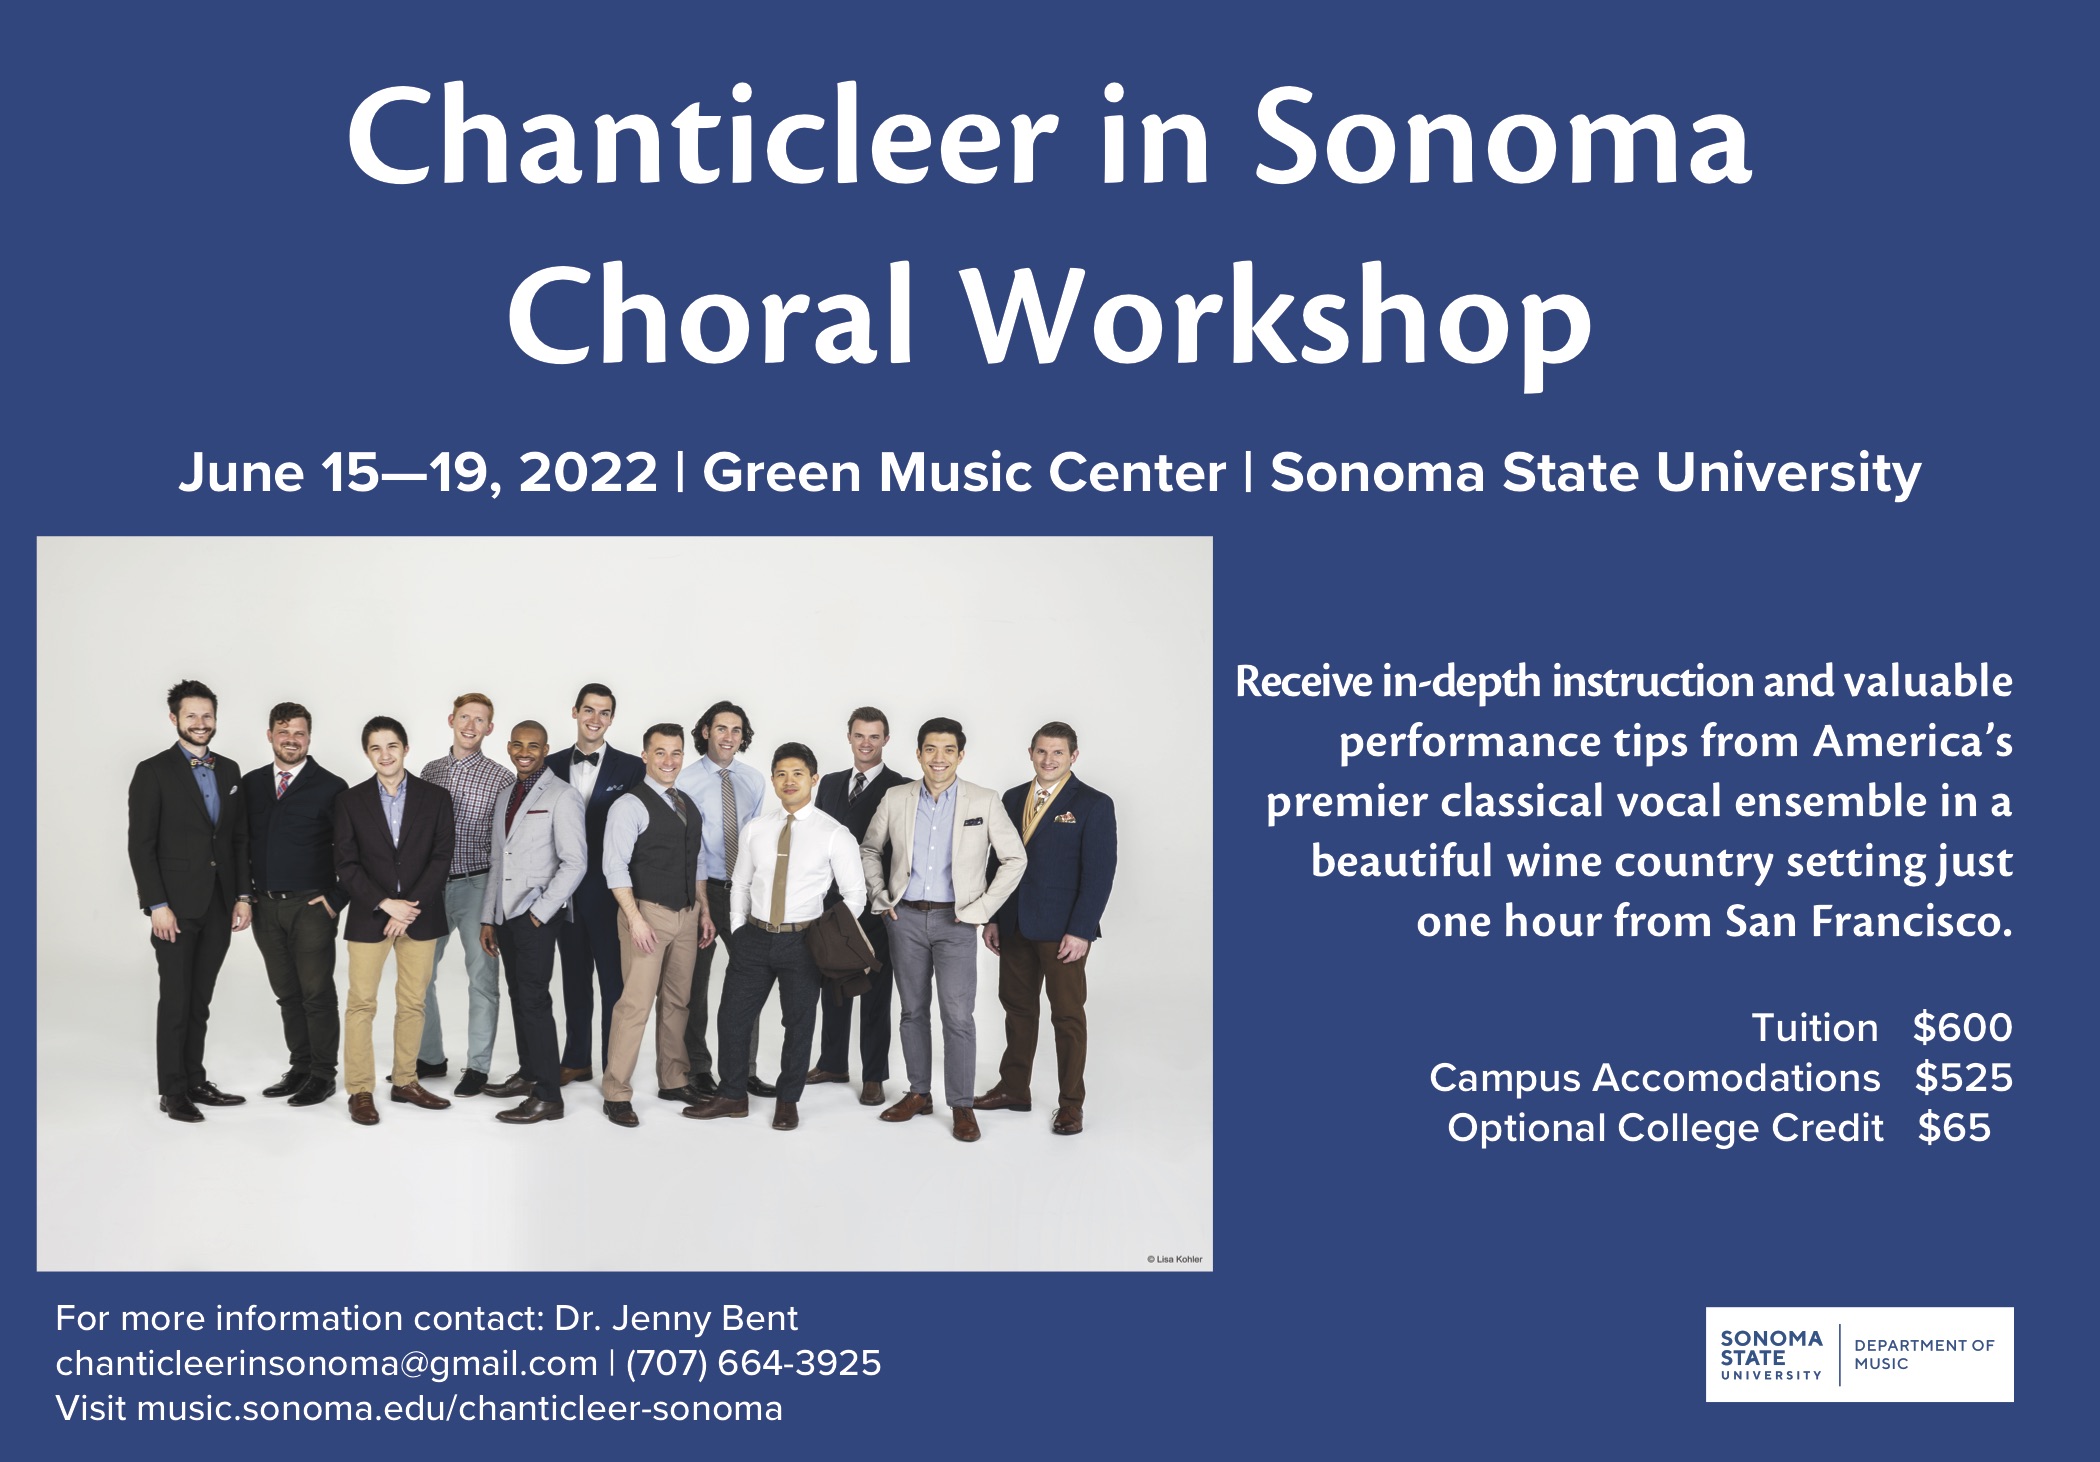 Chanticleer in Sonoma Choral Workshop, June 15–19, 2022, Green Music Center, Sonoma State University, Receive in-depth instruction and valuable performance tips from America's premier classical vocal ensemble in a beautiful wine country setting 